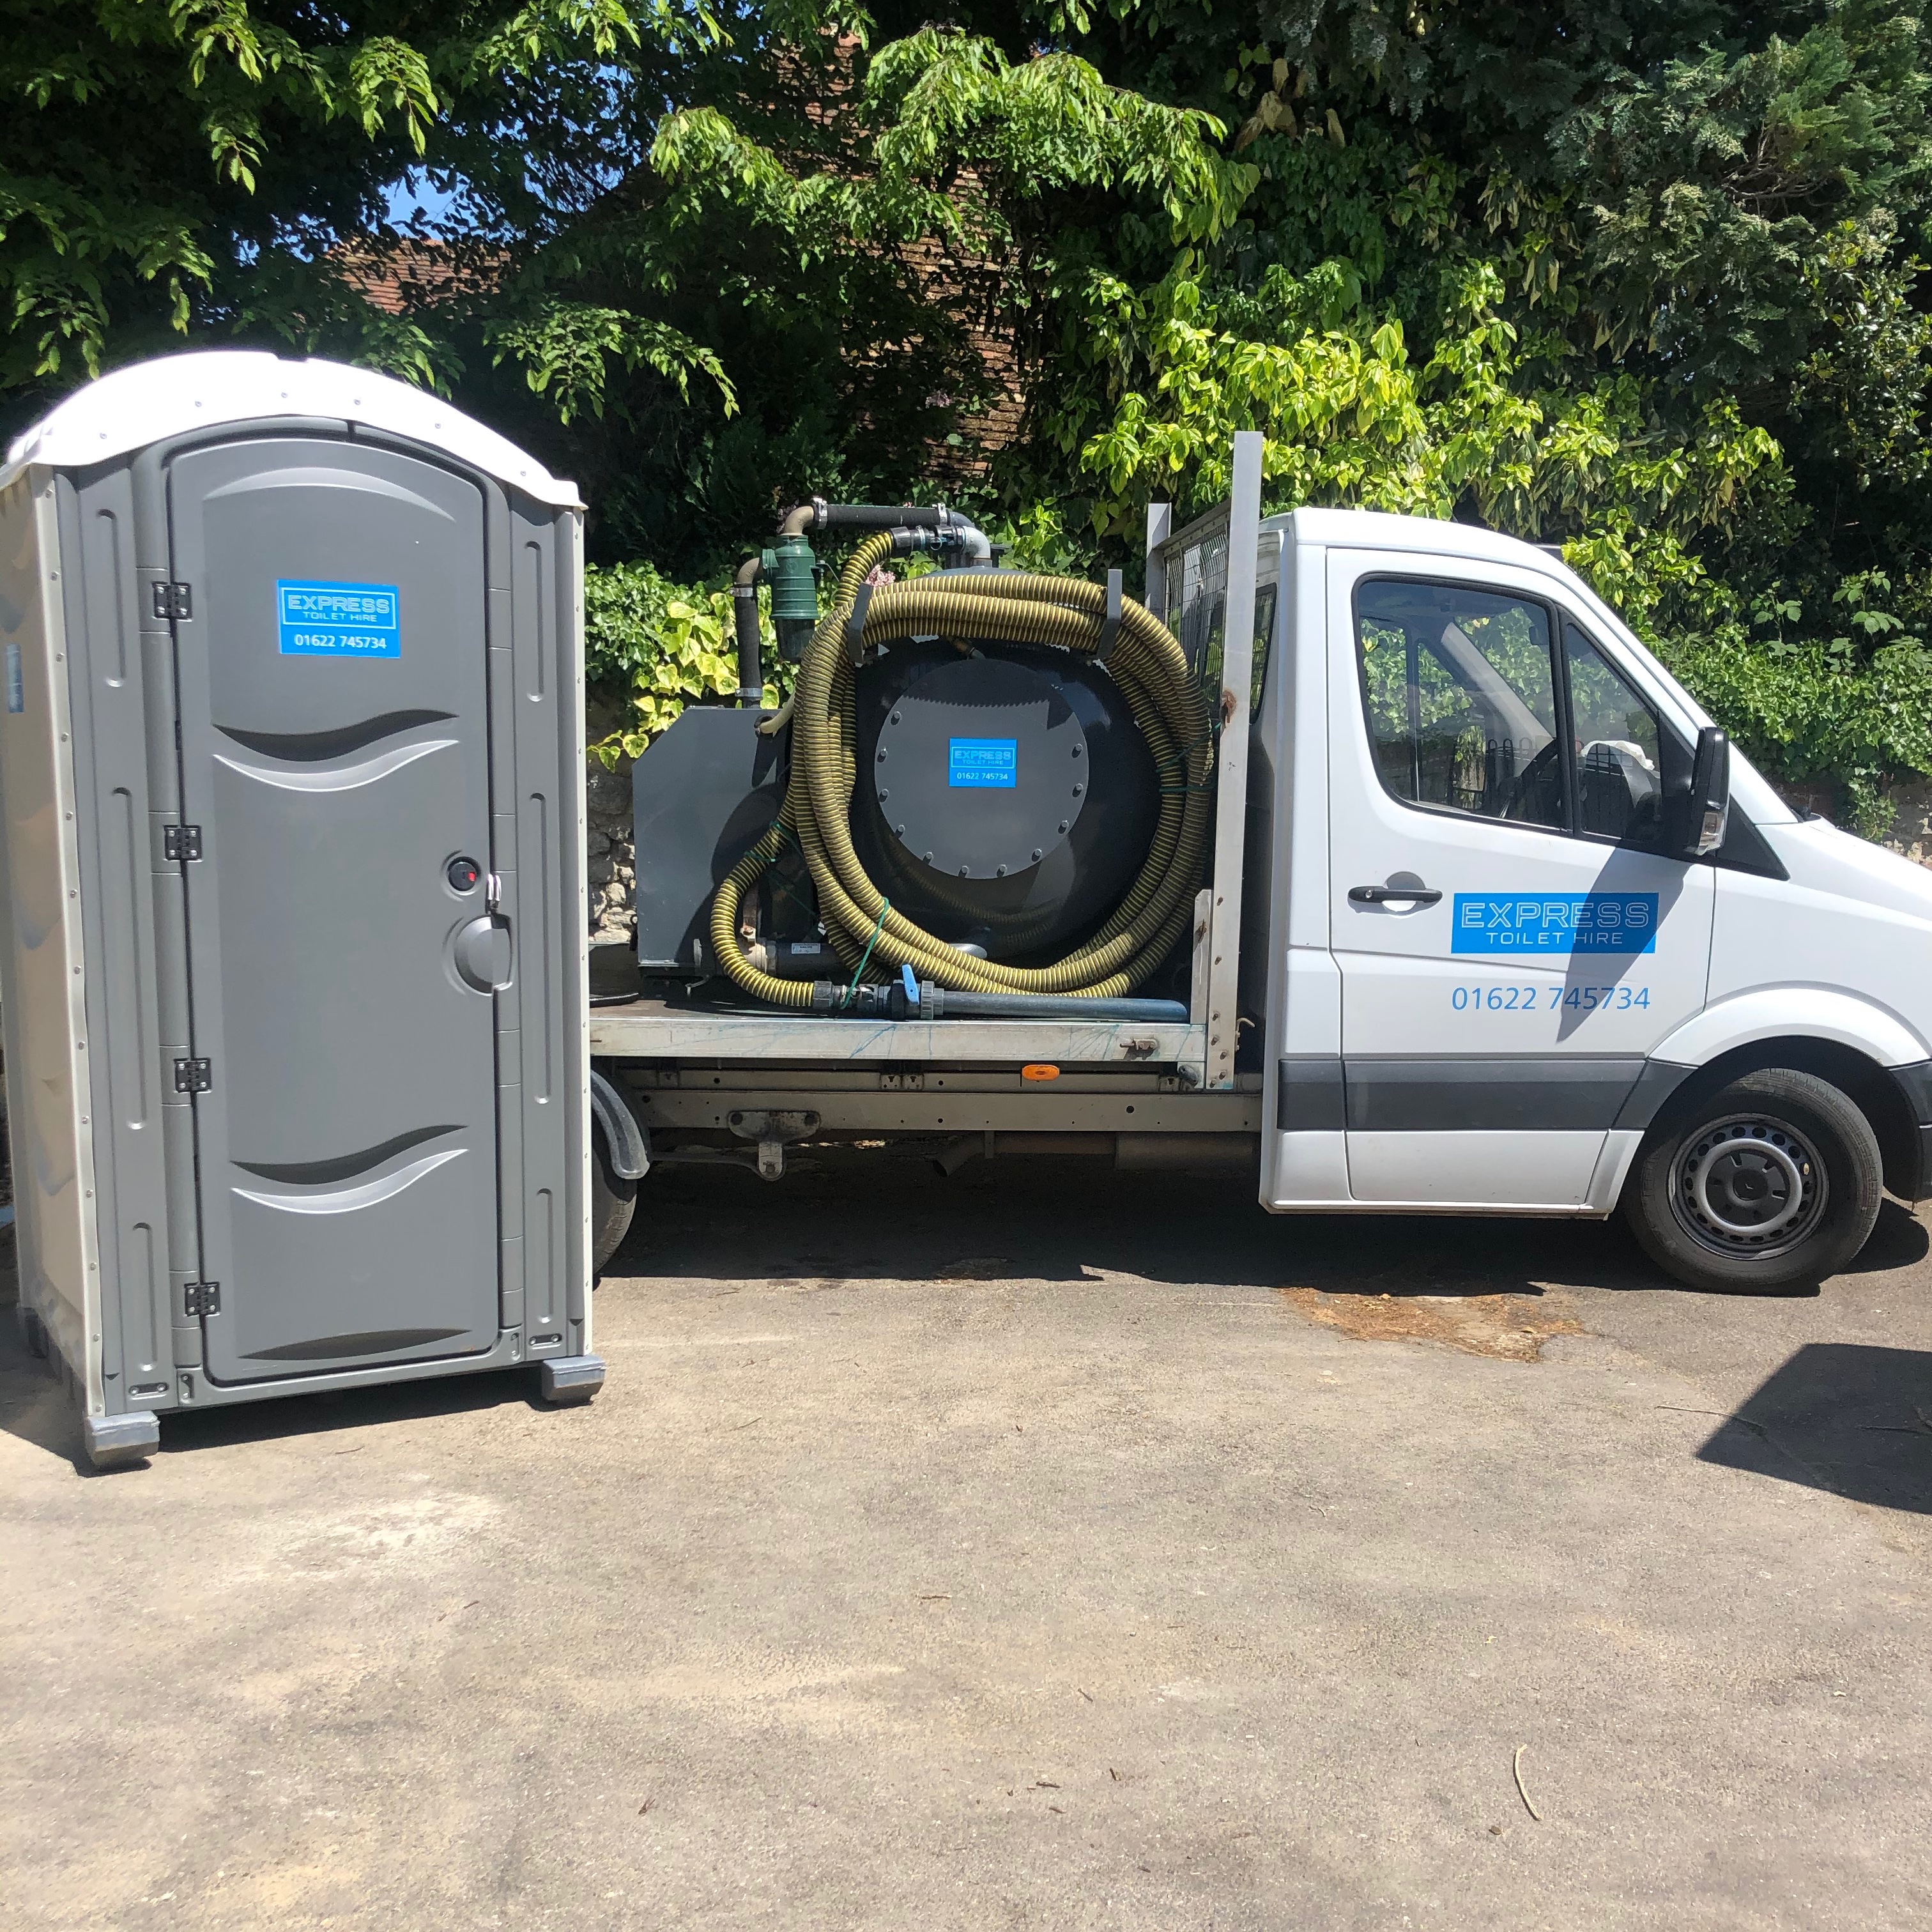 Portable Toilets and Showers For Hire - Online Hire